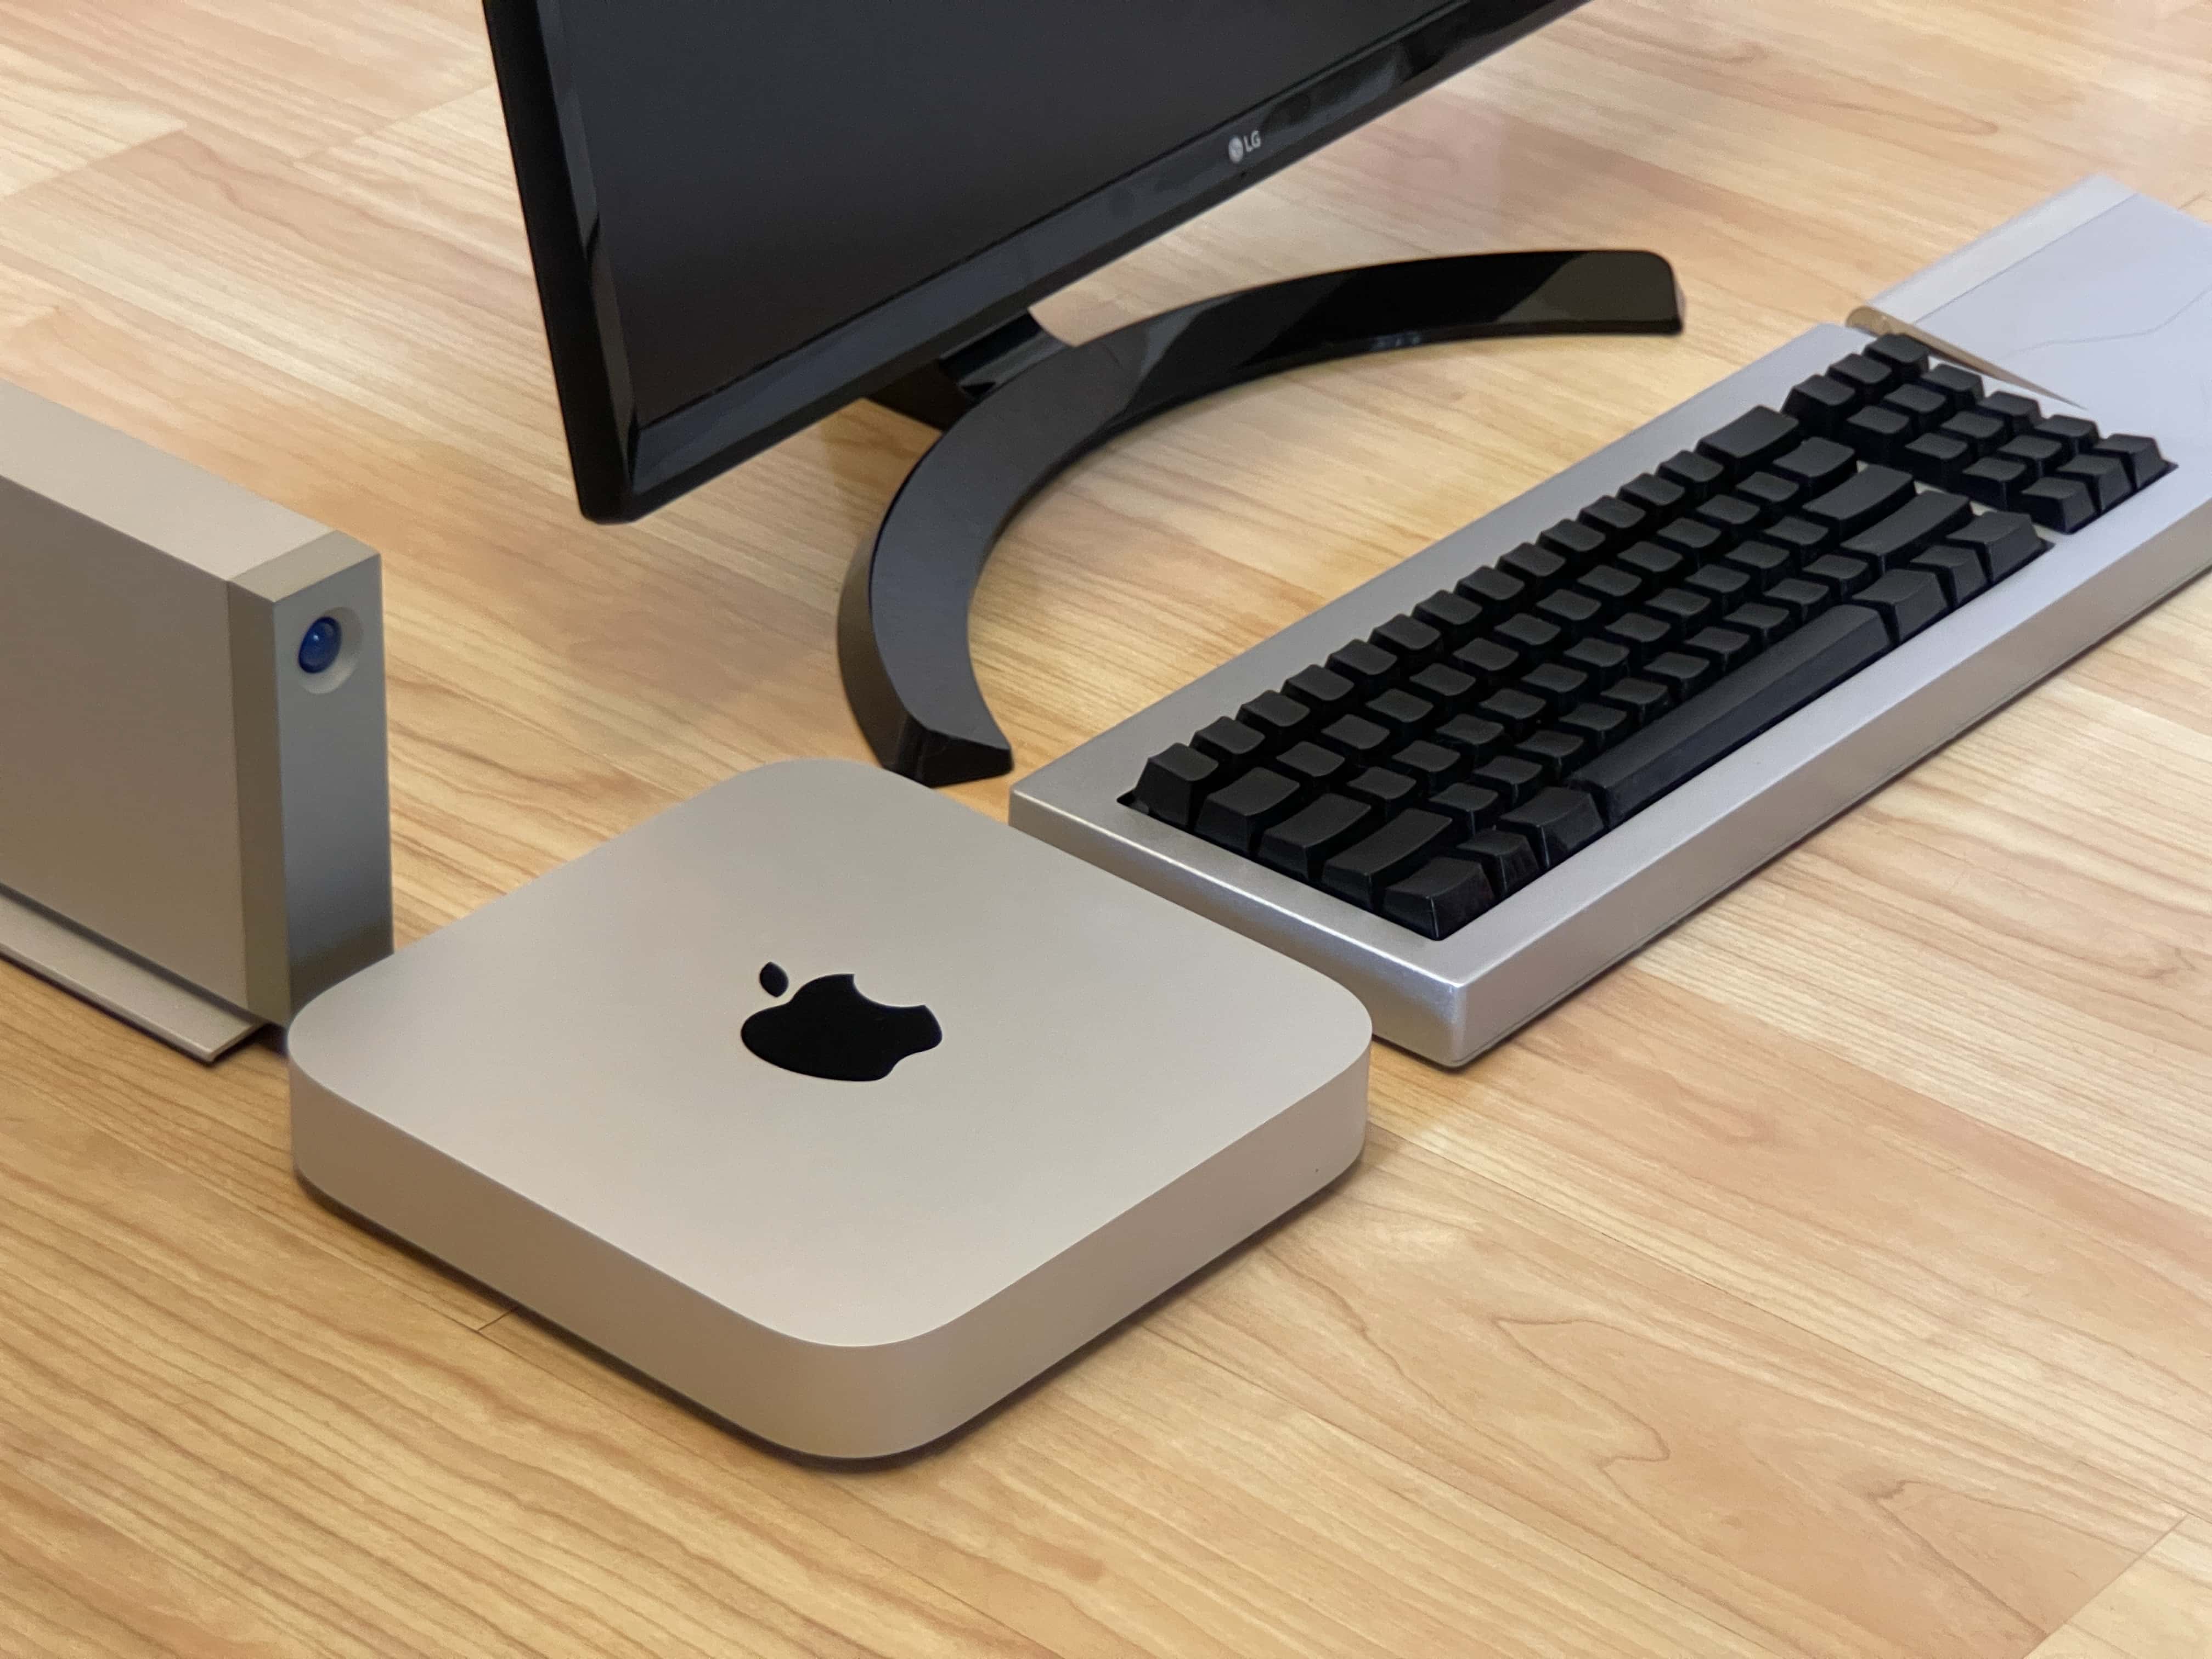 M2 Pro Mac mini review: Apple silicon for the rest of us